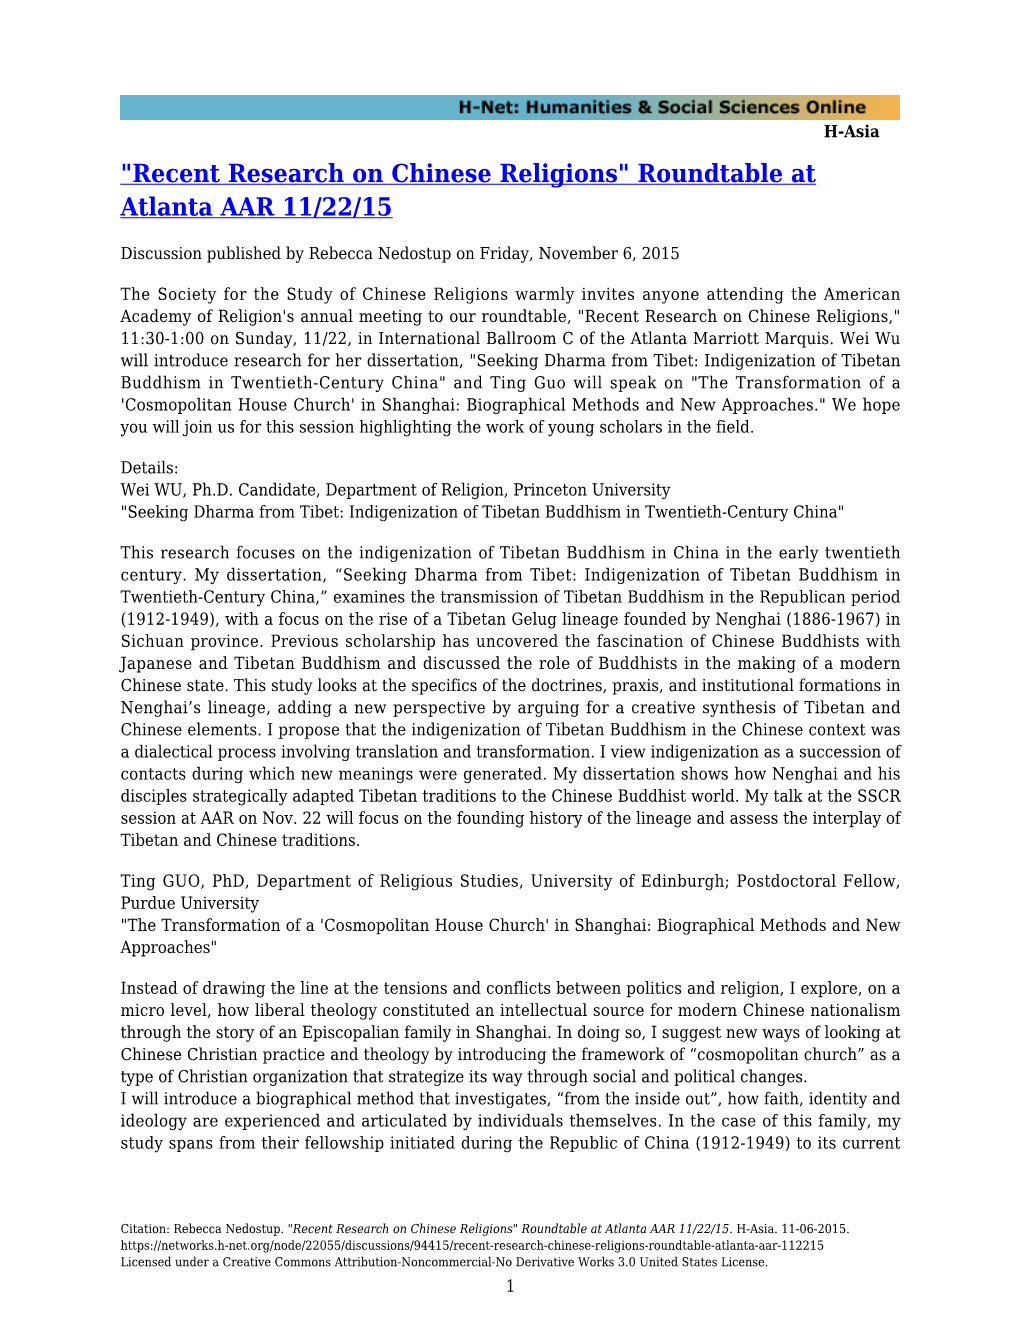 "Recent Research on Chinese Religions" Roundtable at Atlanta AAR 11/22/15